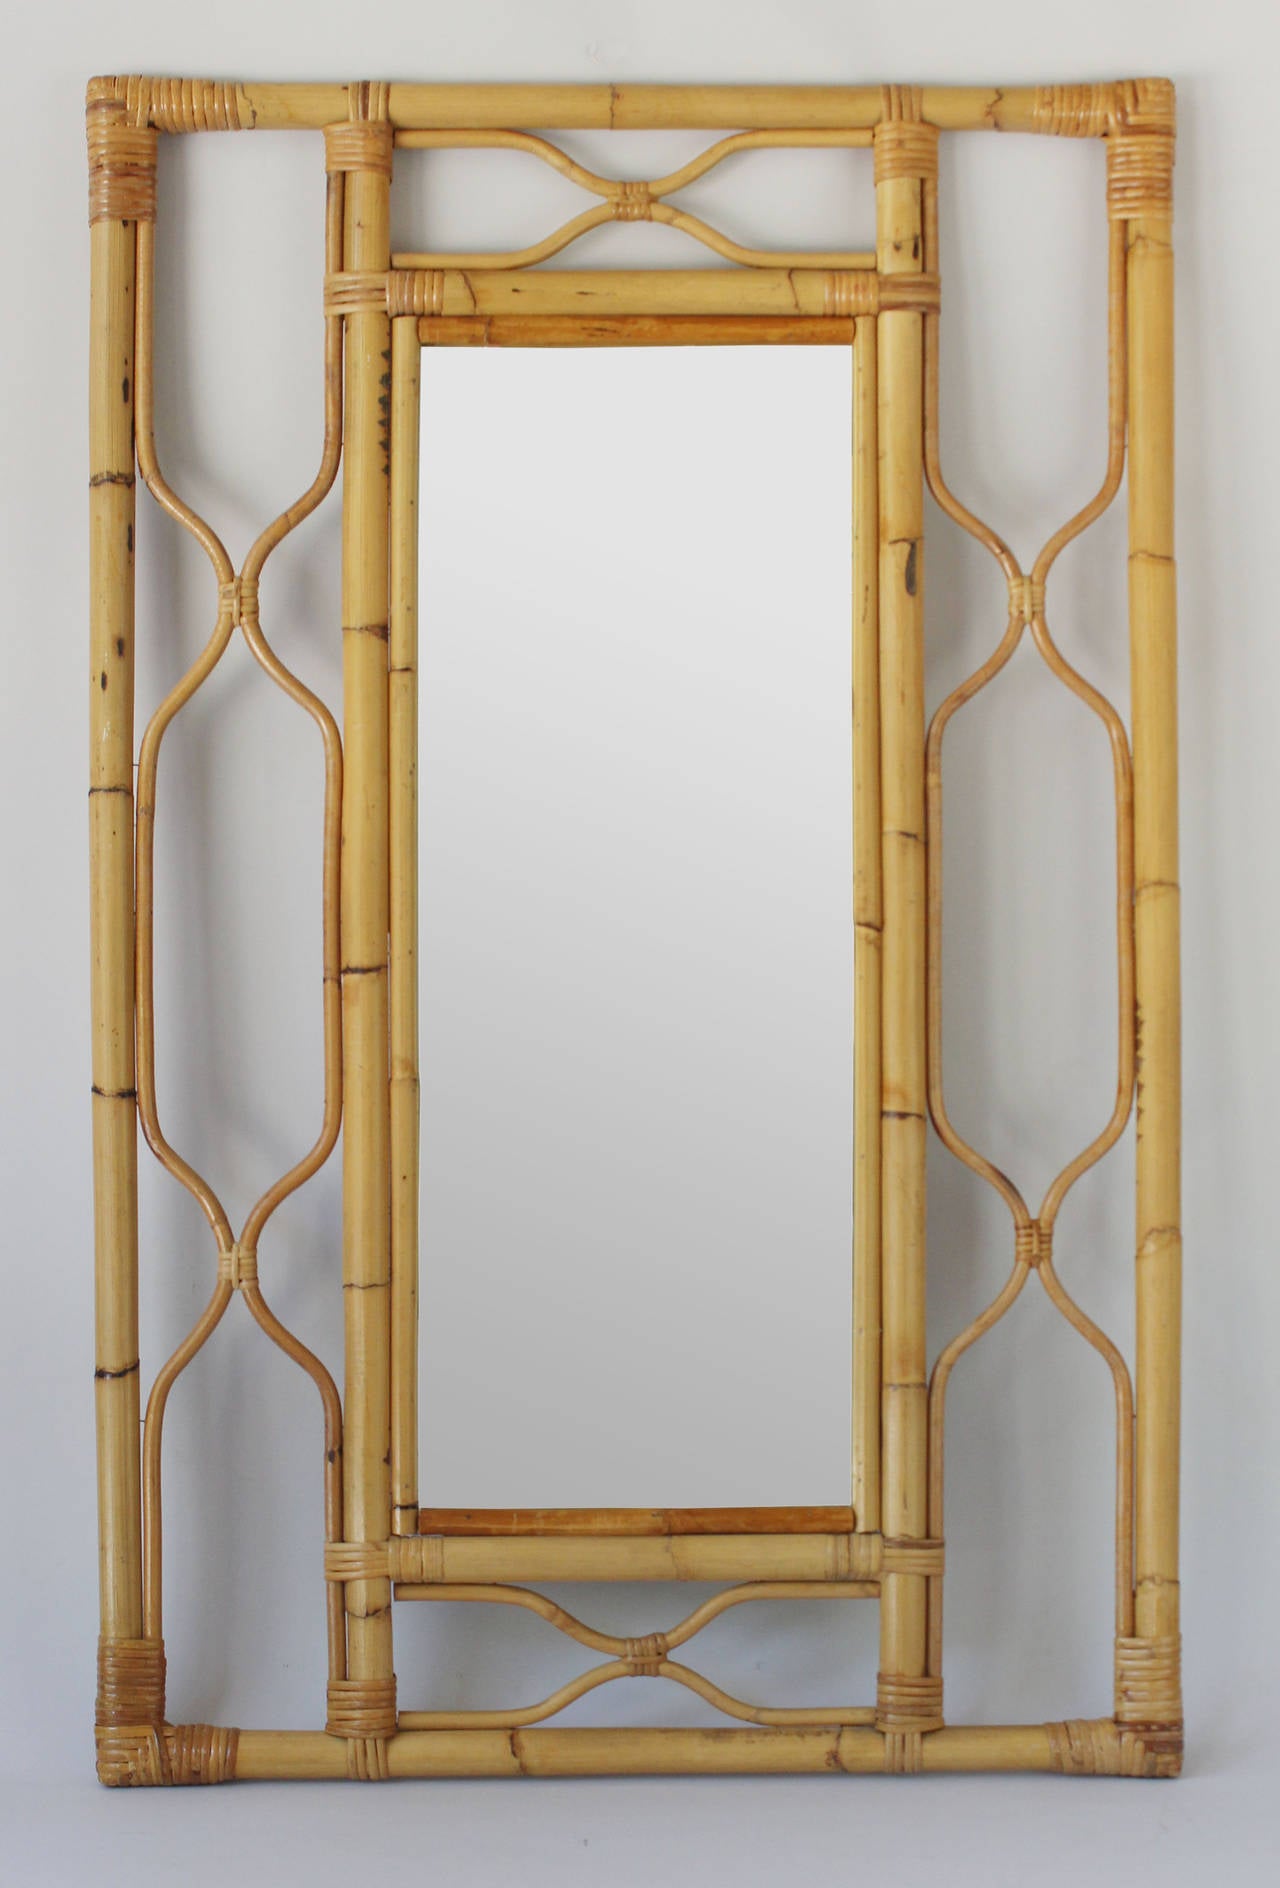 A regency style bamboo and rattan frame mirror with decorative margins.

complementary delivery within 30 miles / Hamptons